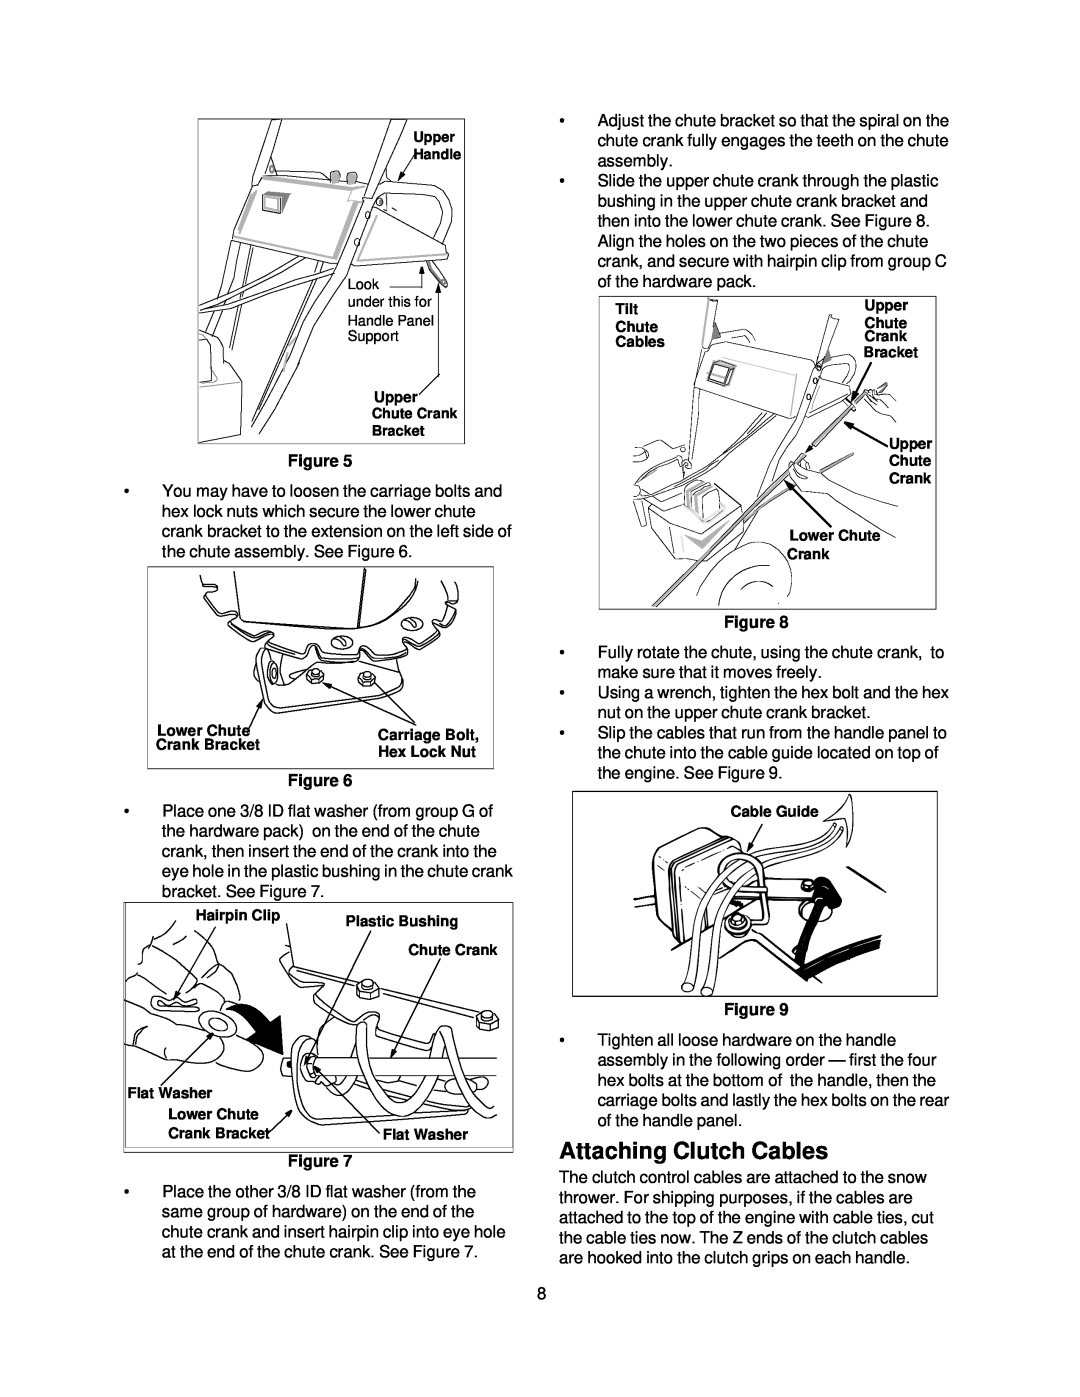 Sears 247.88852 owner manual Attaching Clutch Cables, Lower Chute, Crank Bracket, Hex Lock Nut 